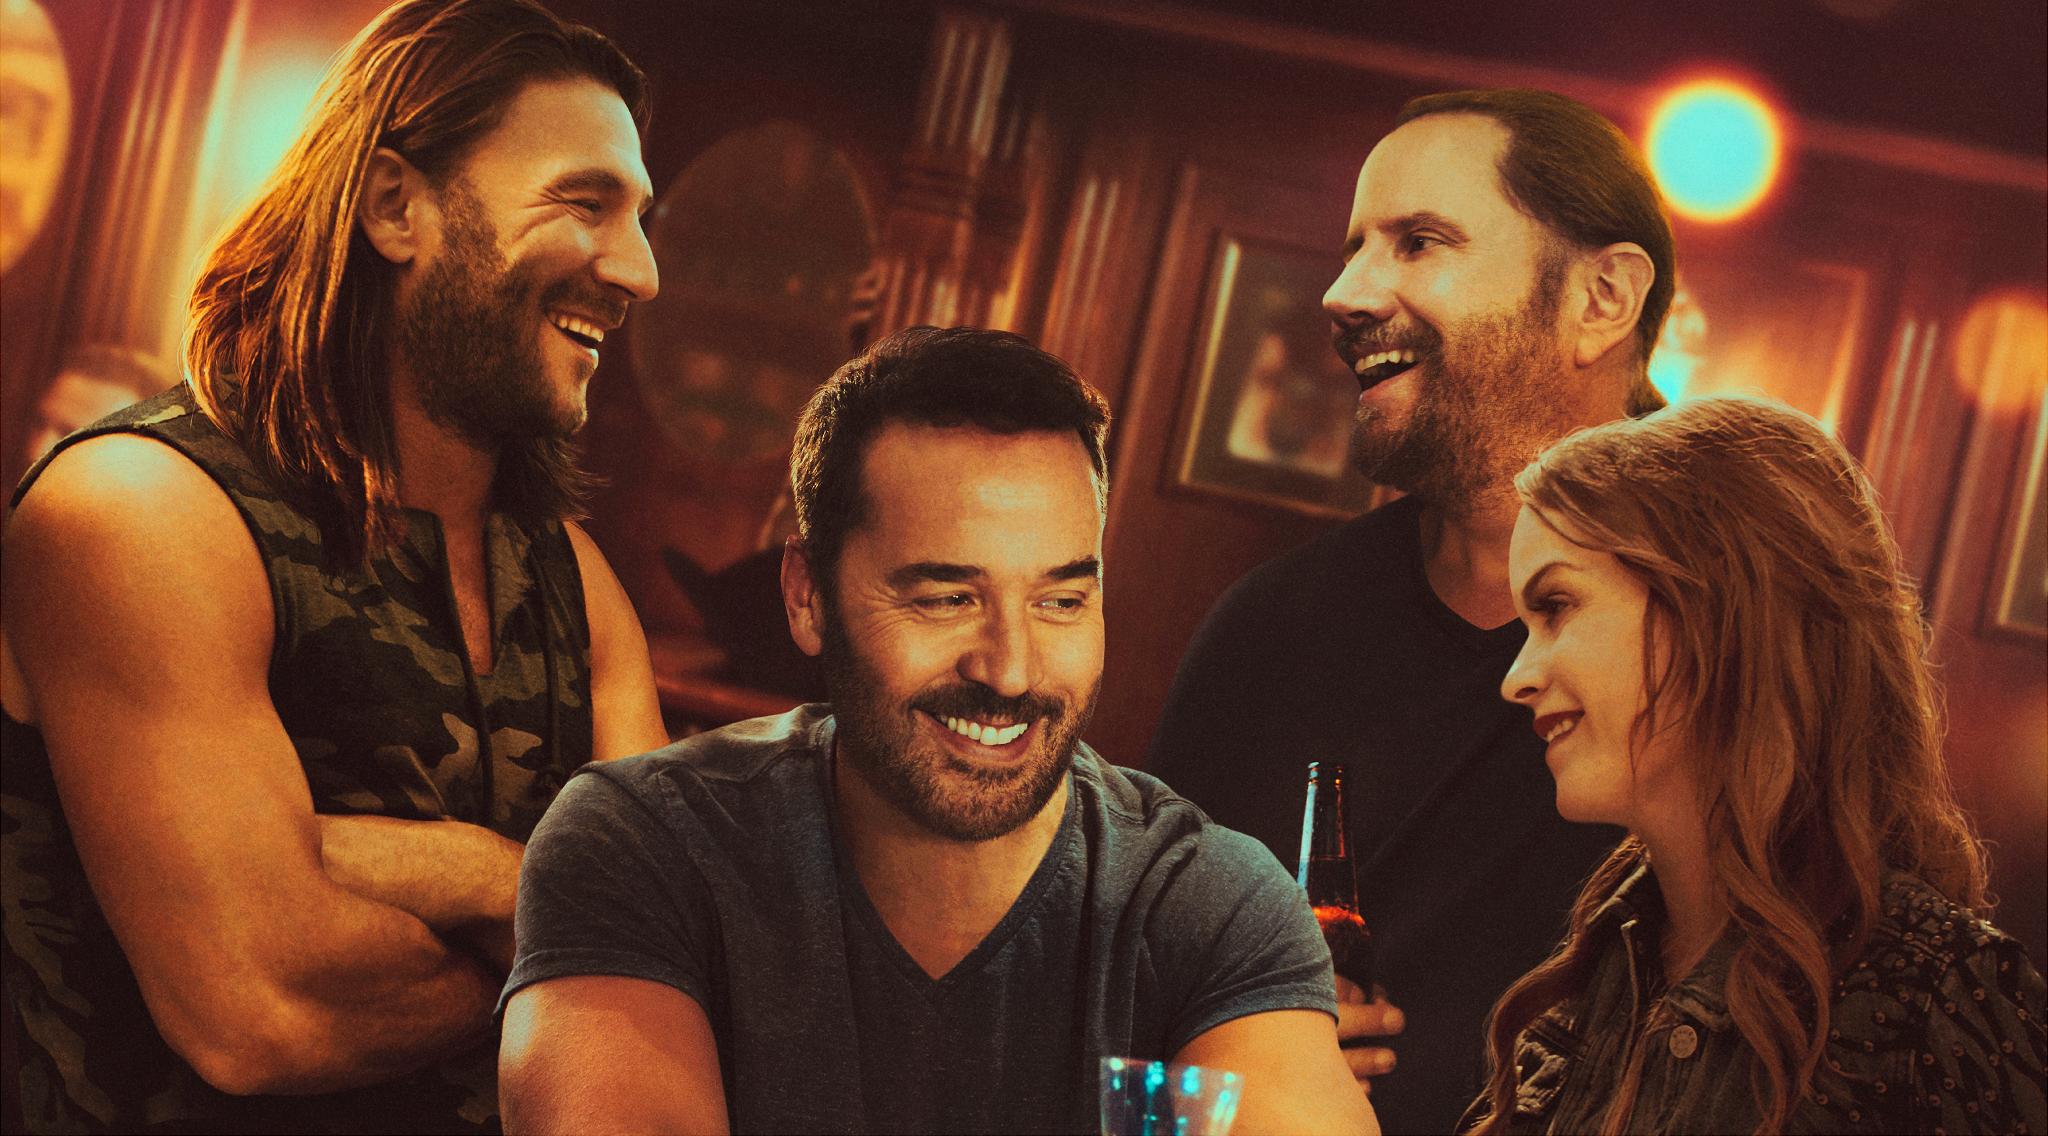 IFC Films Drops A Trailer For Their Upcoming Comedy ‘Last Call’ Starring Jeremy Piven